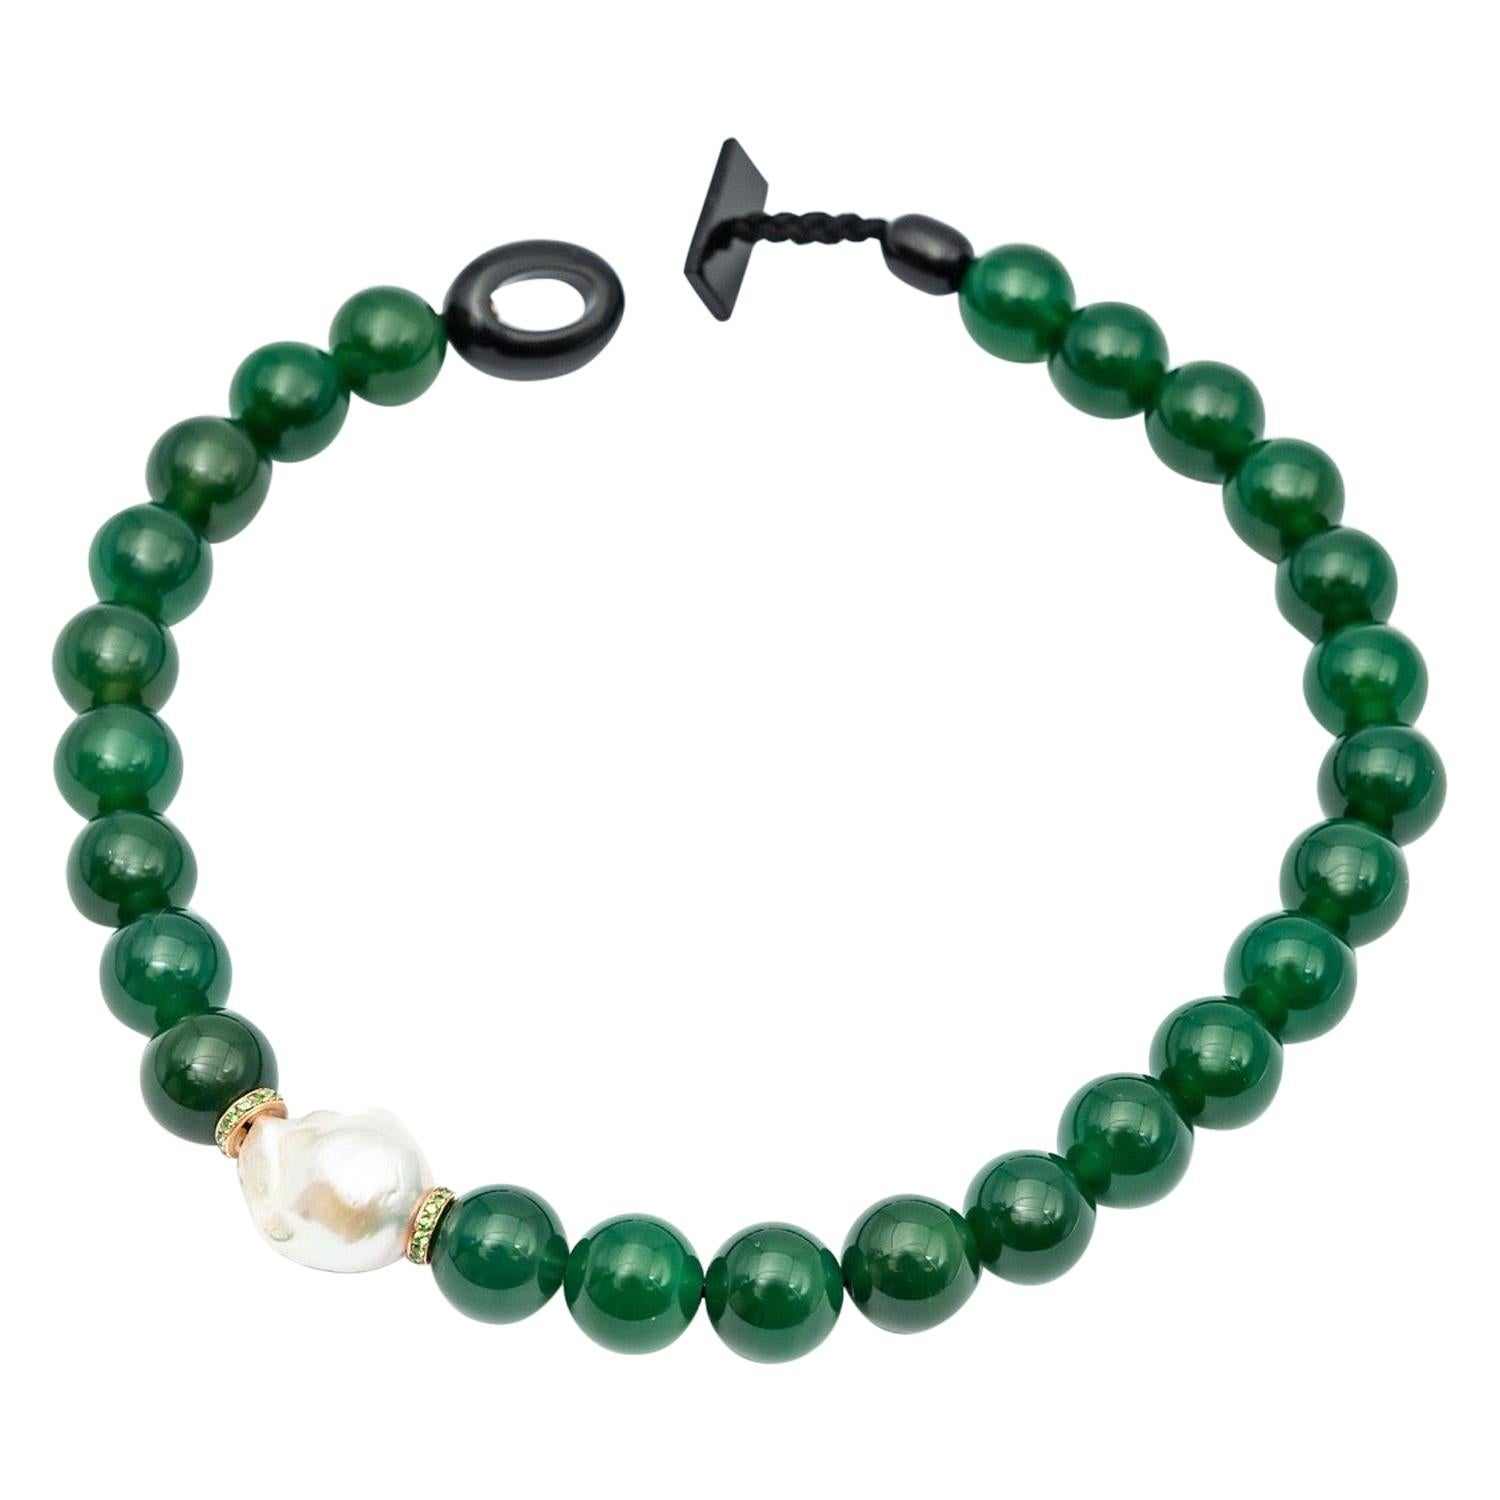 Green Agate Beads Necklace Accompanied by Baroque Pearl and 0.32 Ct of Tsavorite